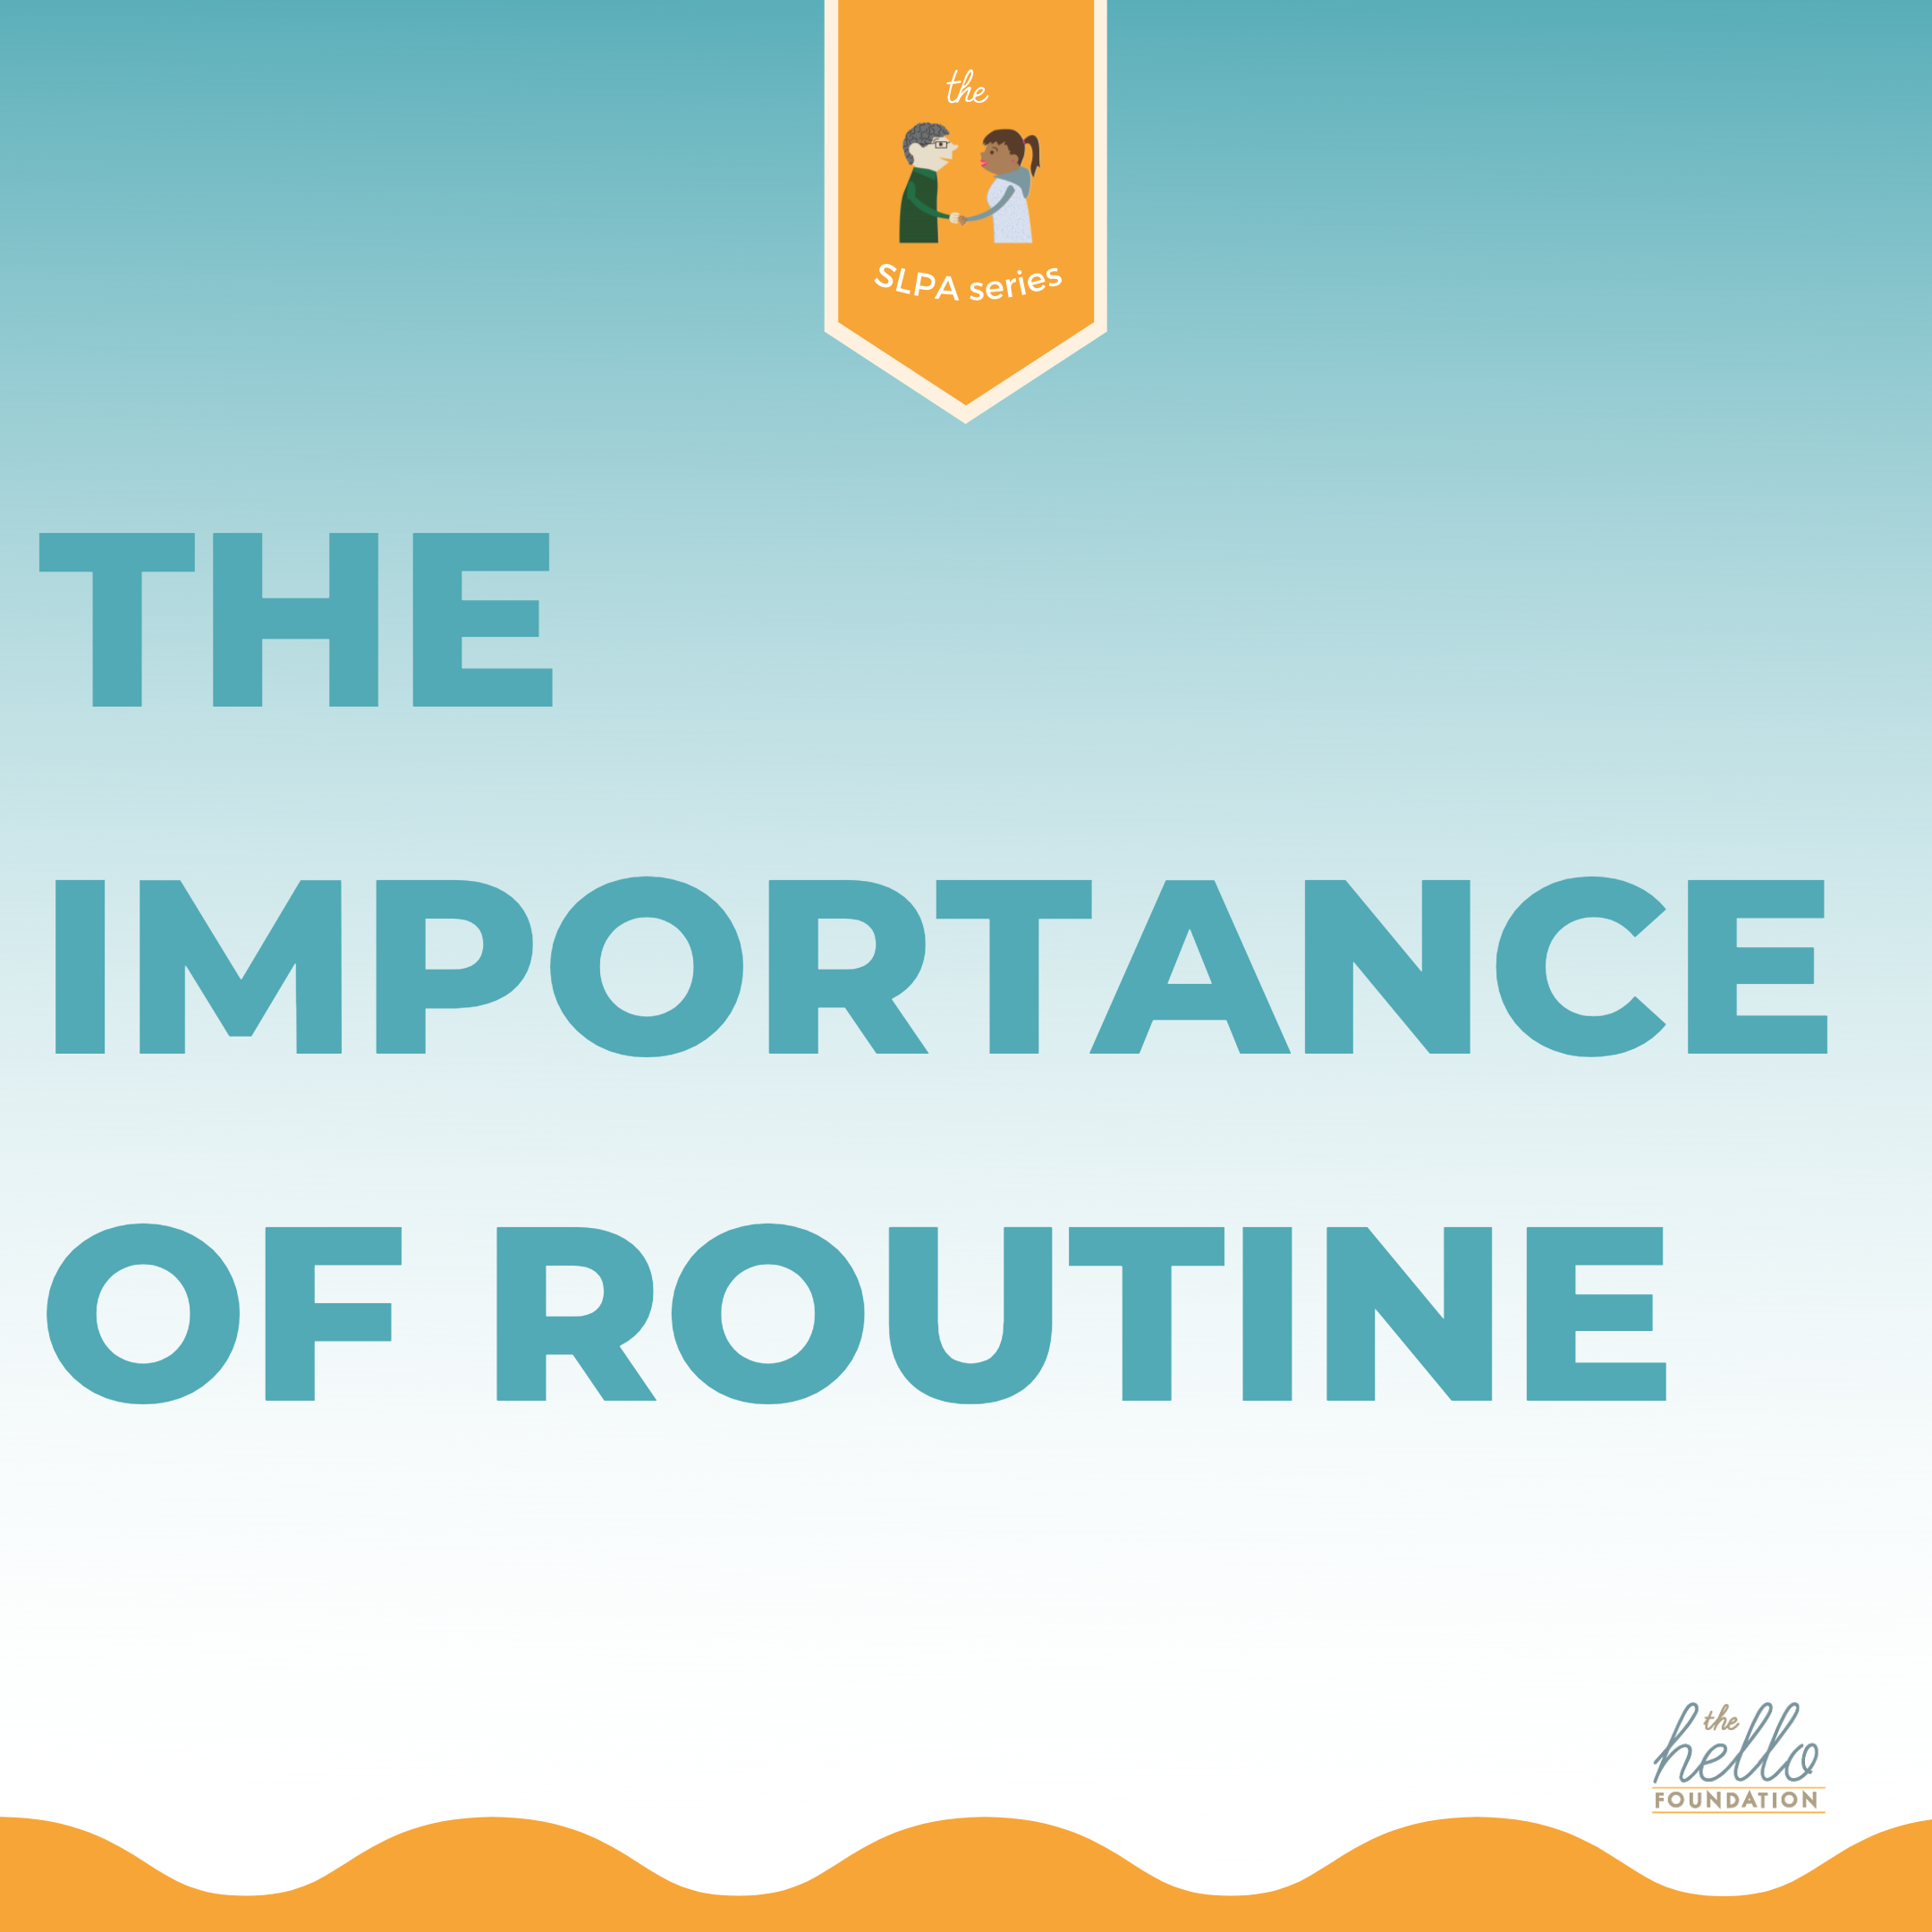 the SLPA series: the importance of routine on a teal gradient, yellow-orange wave border on bottom of image